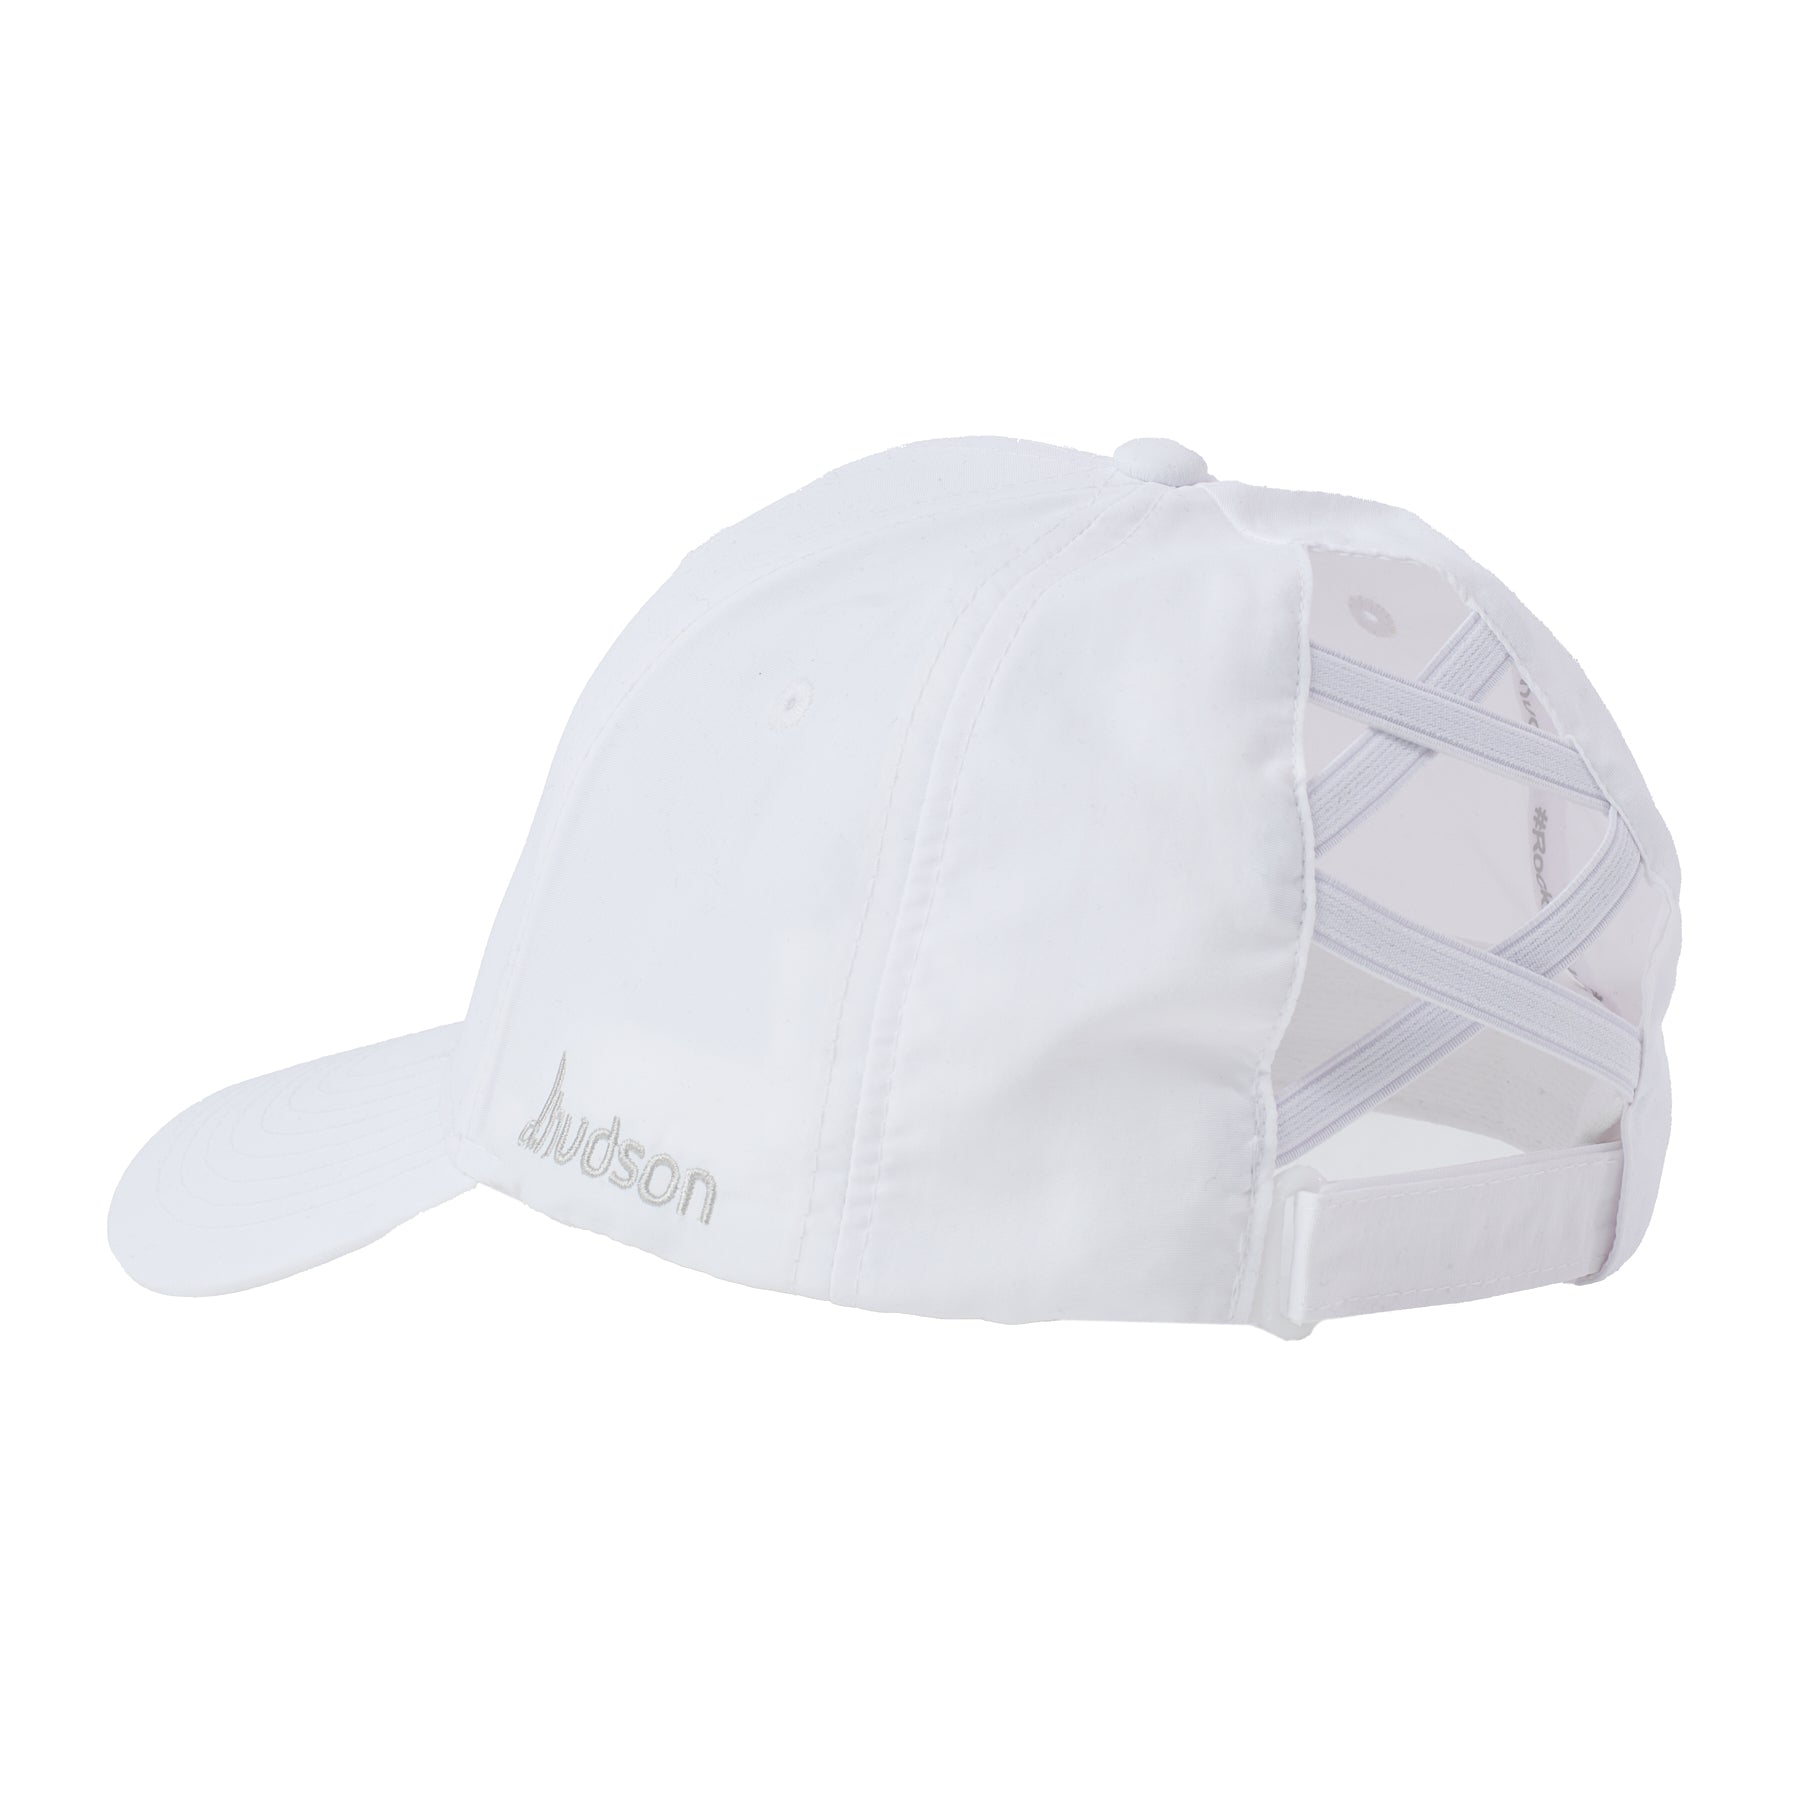 Swirlin' Paddle Ladies Fit (White/Gray)